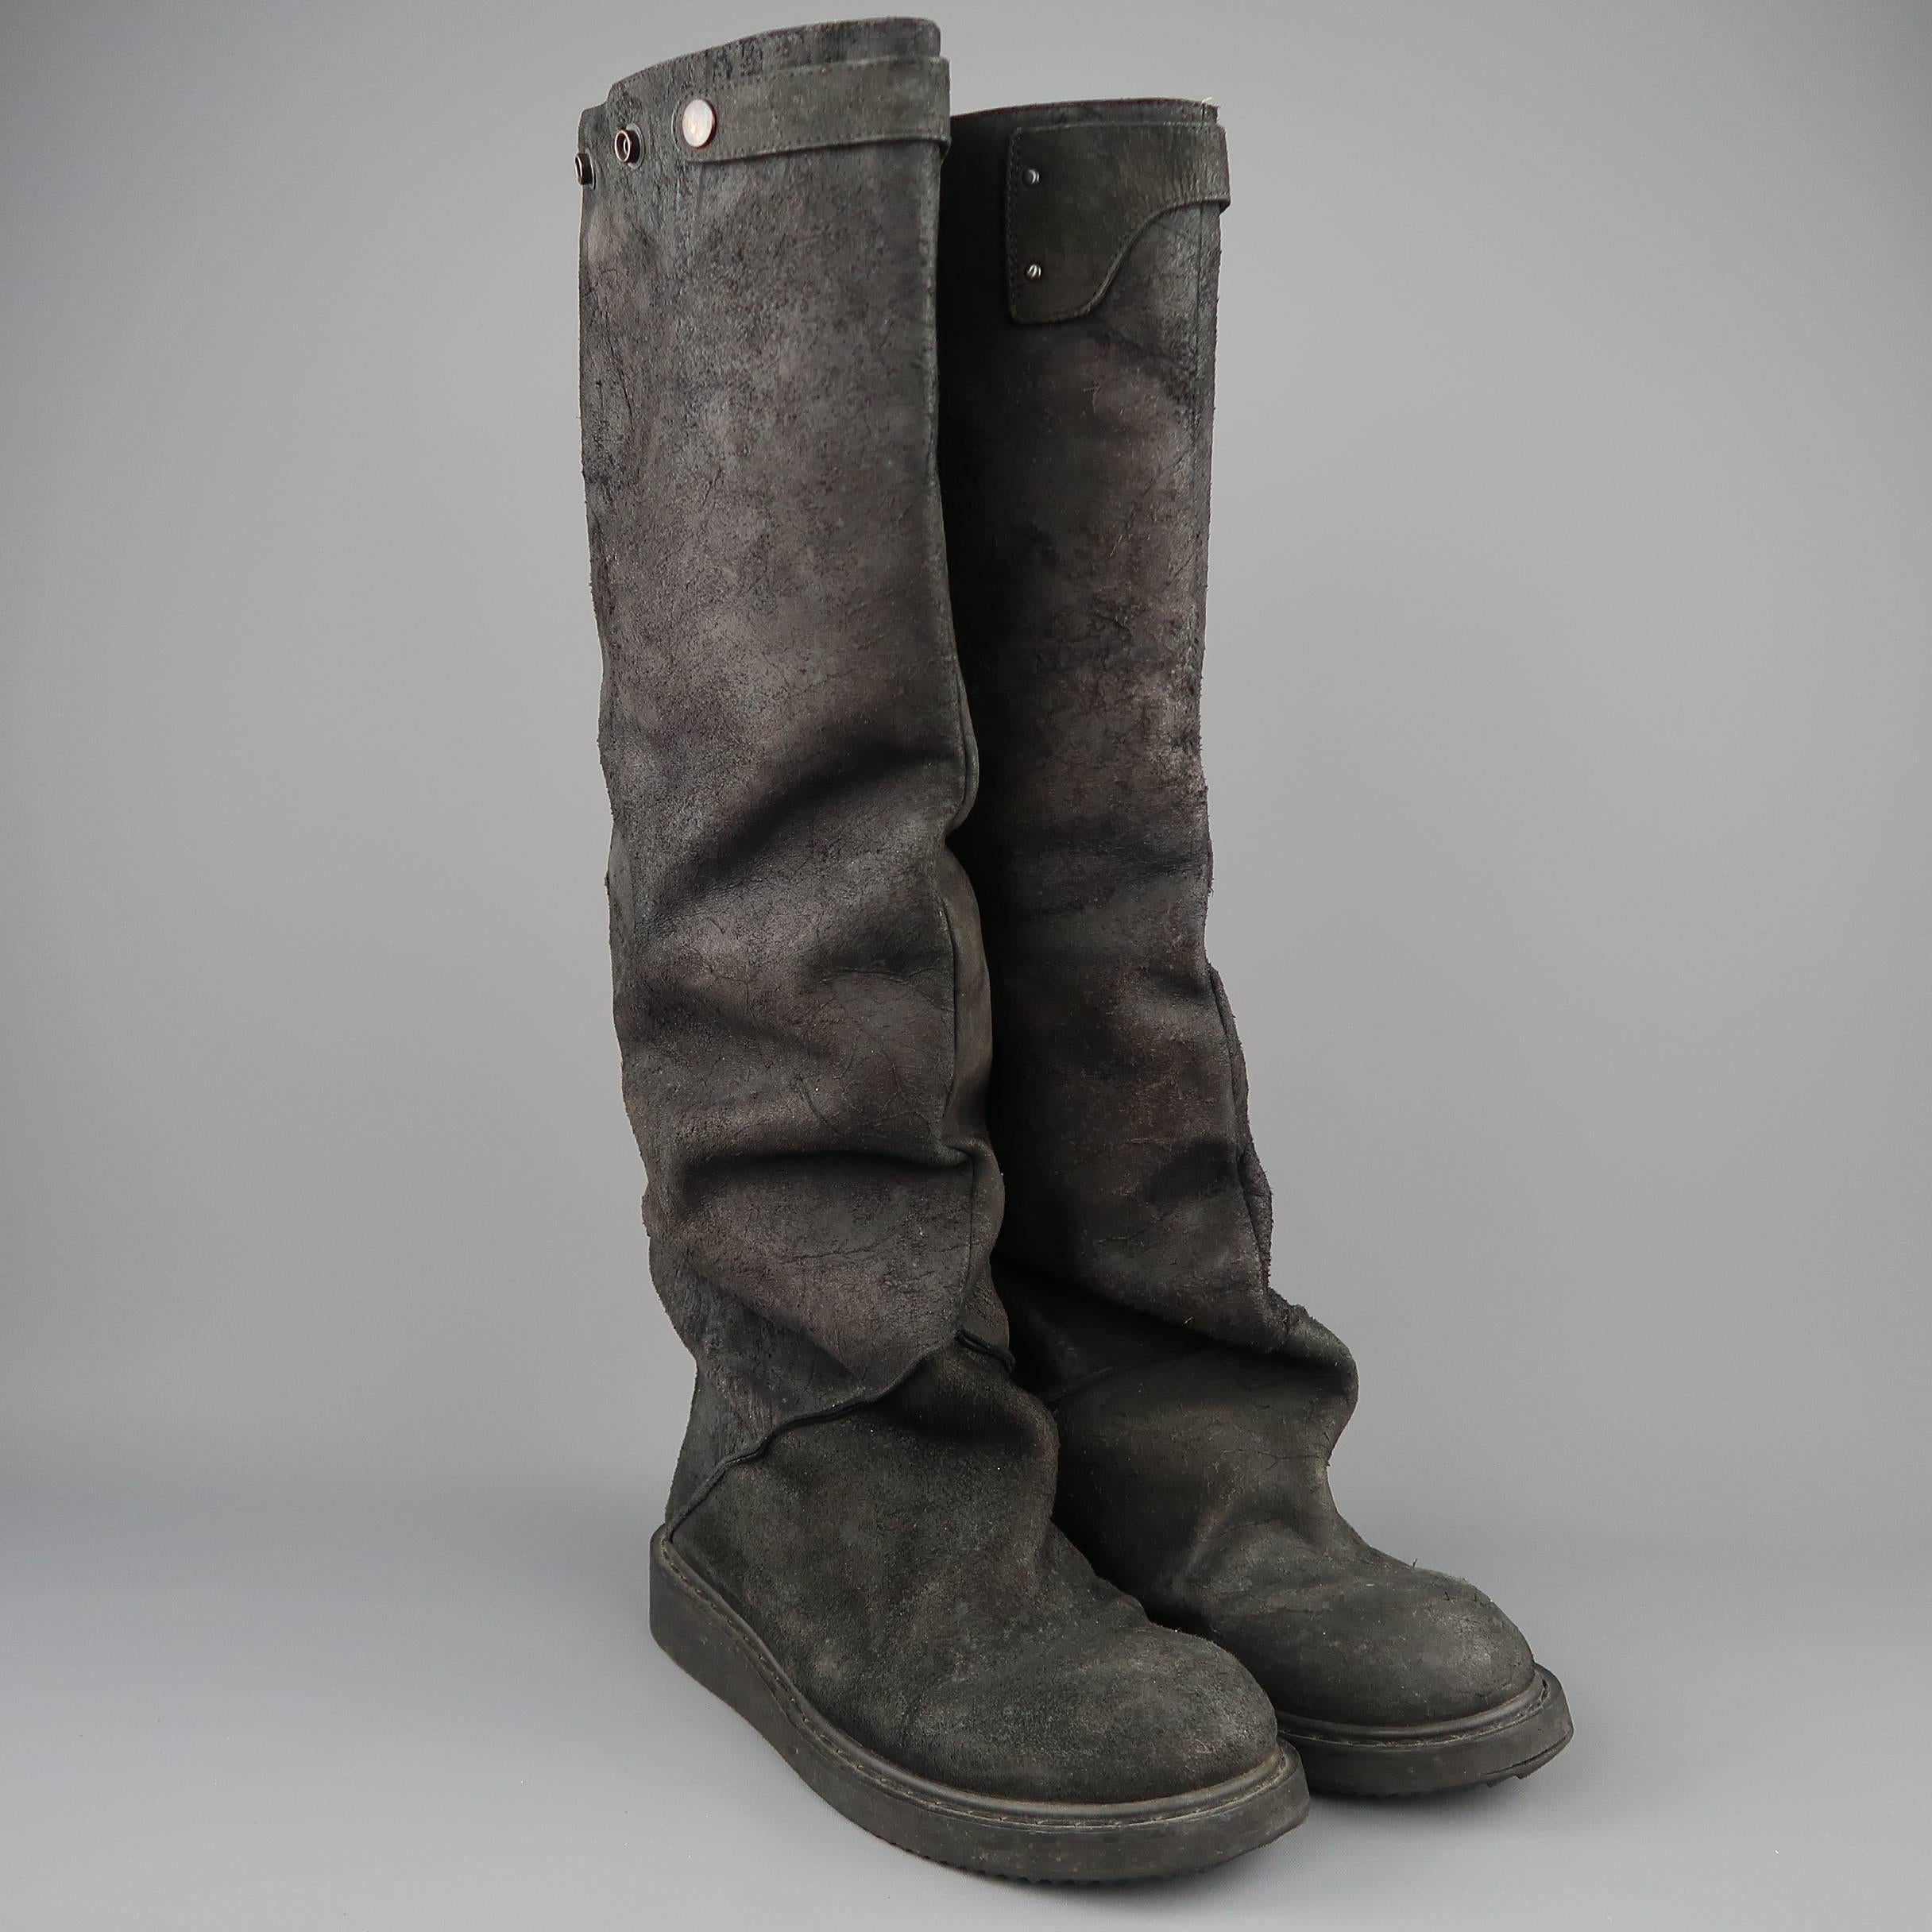 RICK OWENS knee high boots come in black sueded distressed leather with a round toe, thick sole, oversized slouchy construction, and back zip closure. Wear throughout. Made in Italy.
 
Good Pre-Owned Condition.
Marked: IT 41
 
Measurements:
